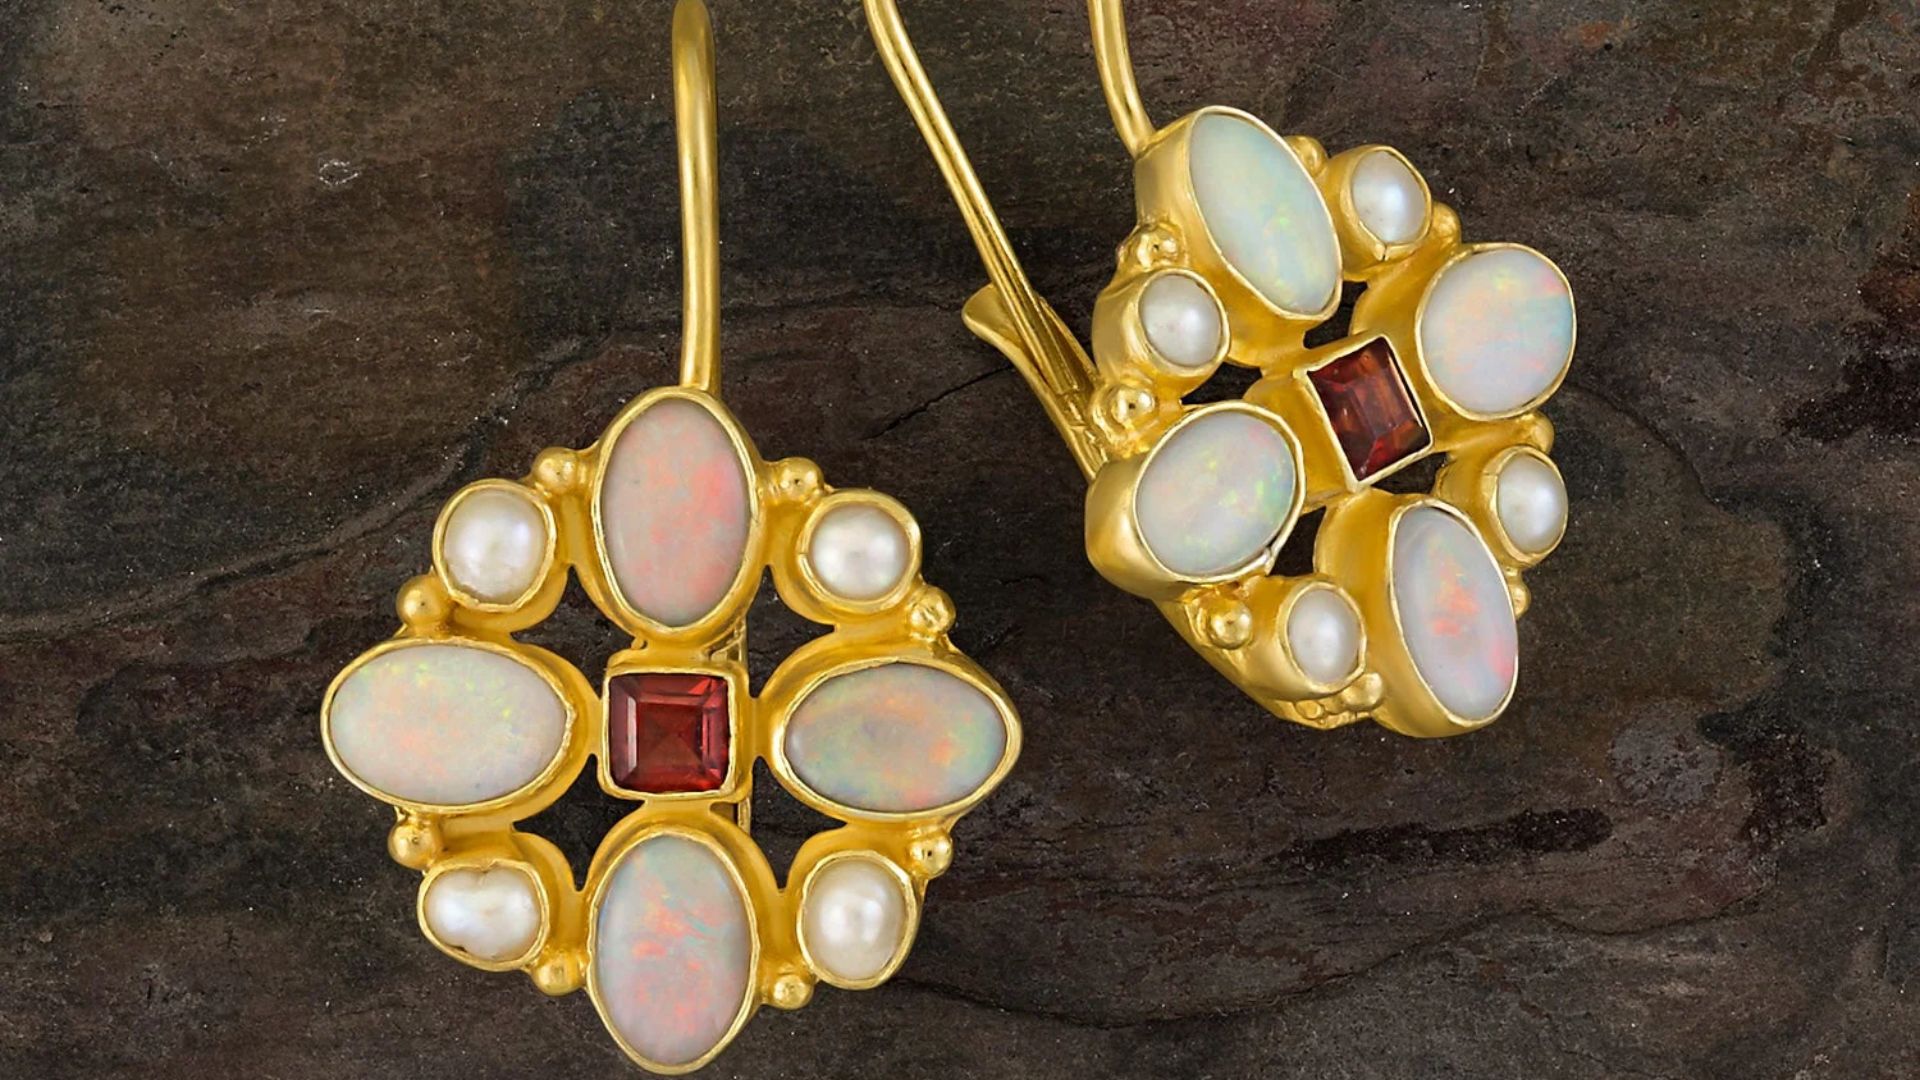 Jewelry Embedded With White Stones